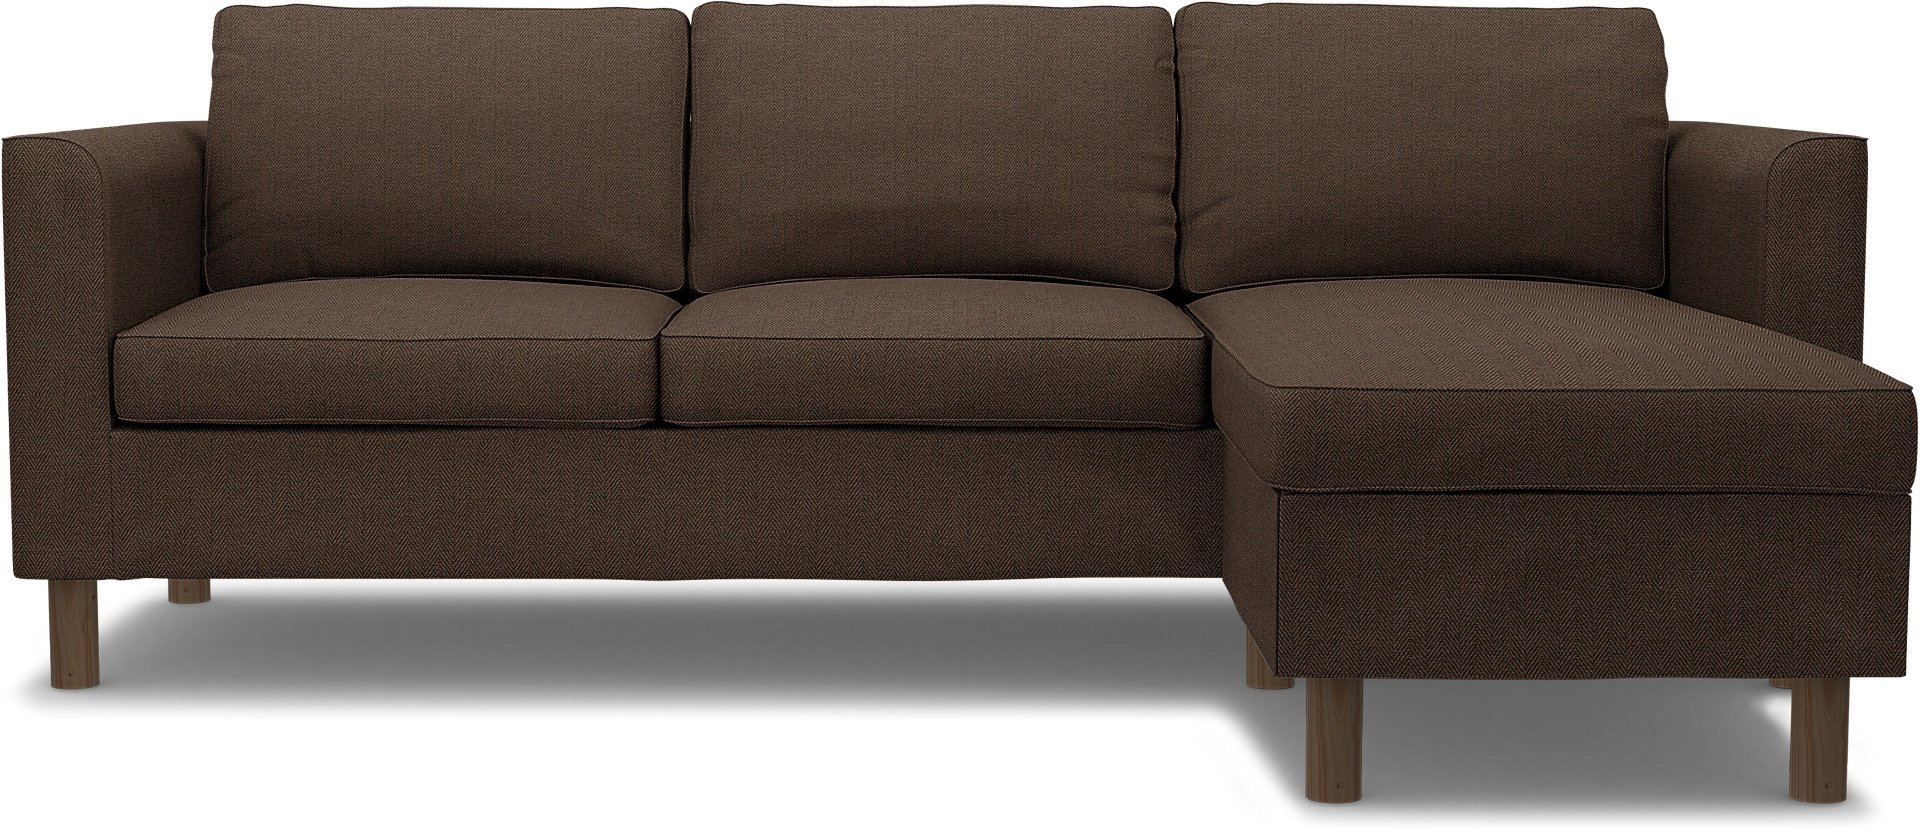 IKEA - Parup 3 Seater with chaise longue, Chocolate, Boucle & Texture - Bemz